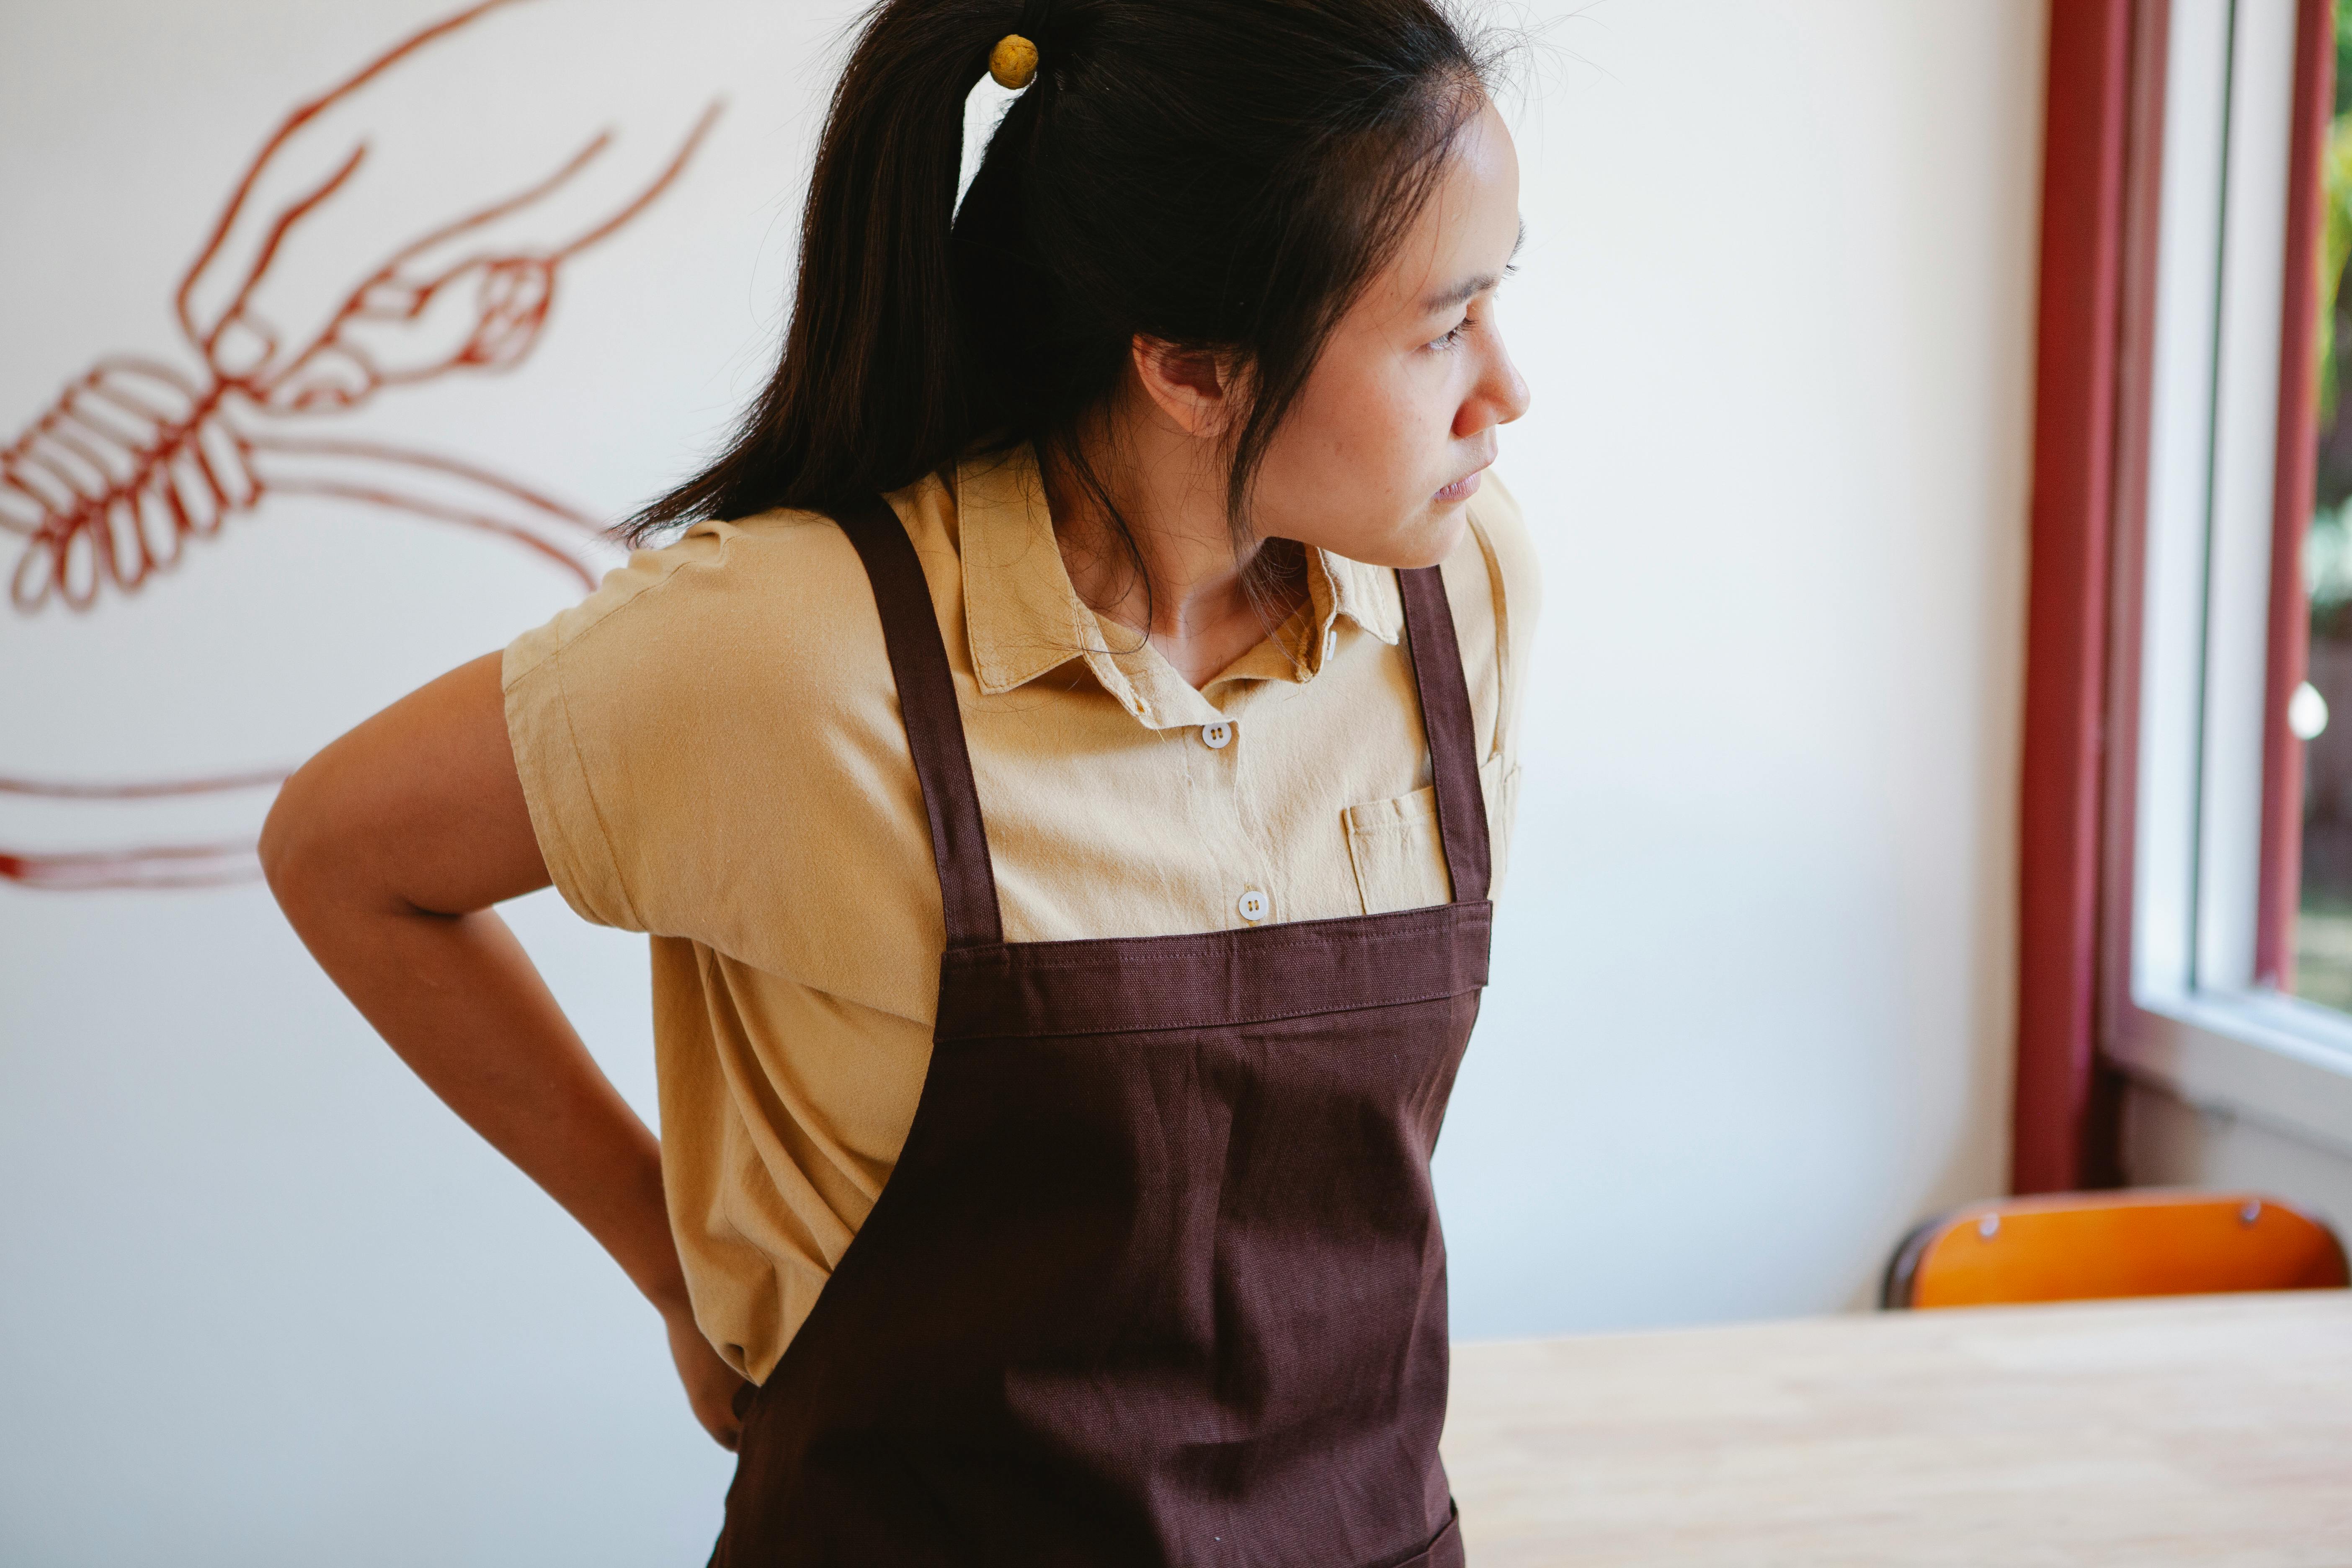 A girl wearing her apron | Source: Pexels